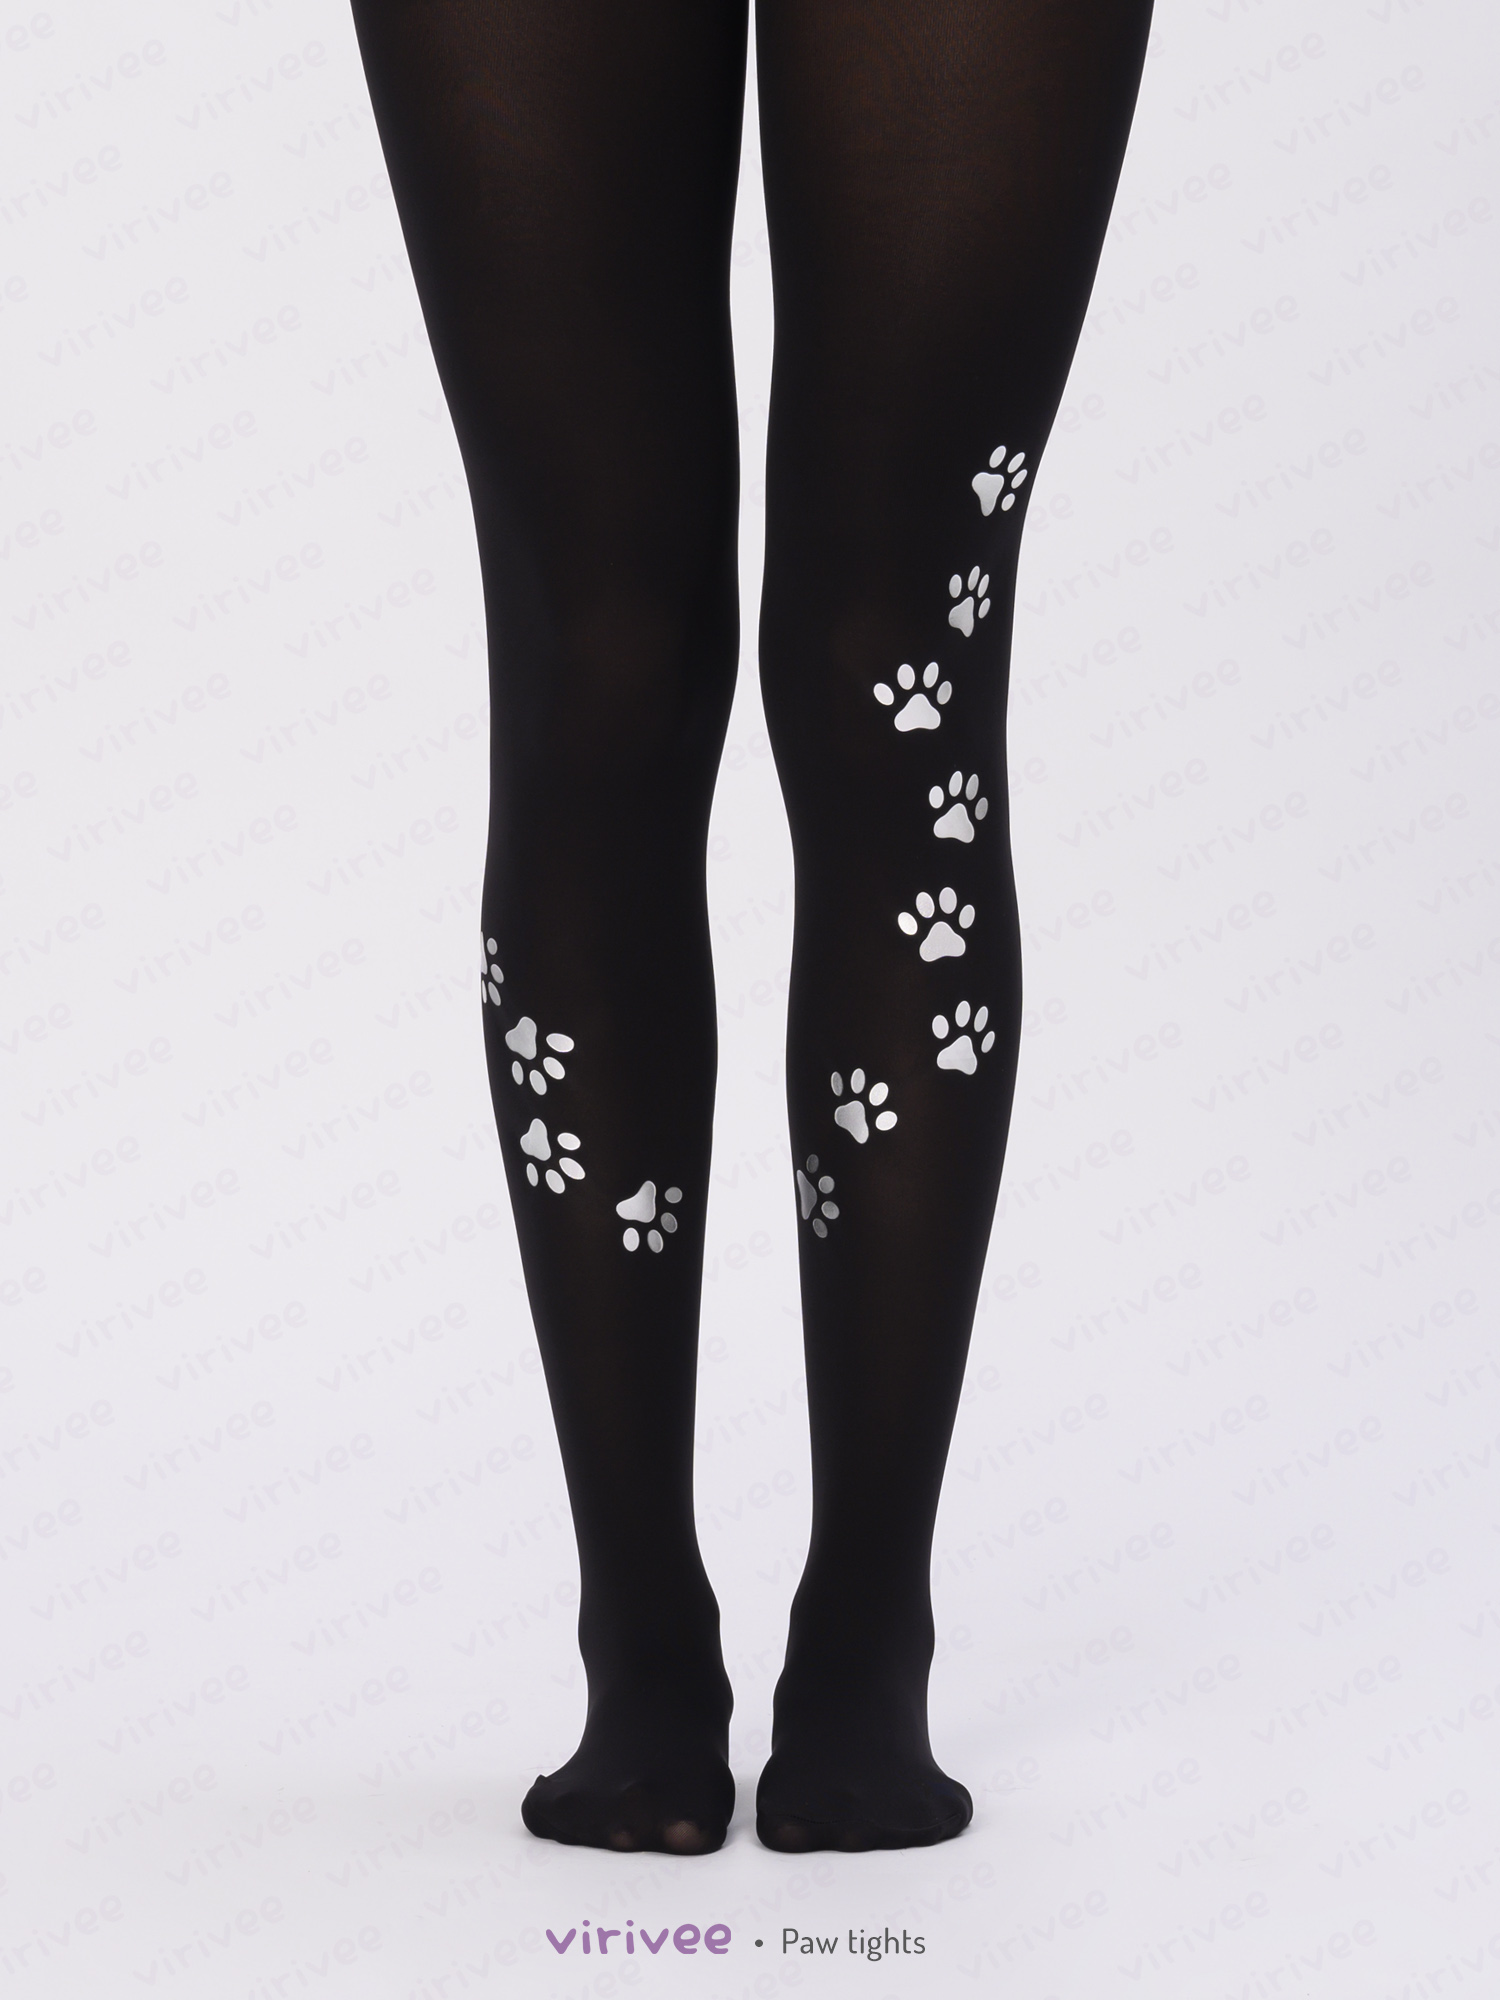 Paw print tights in silver or gold